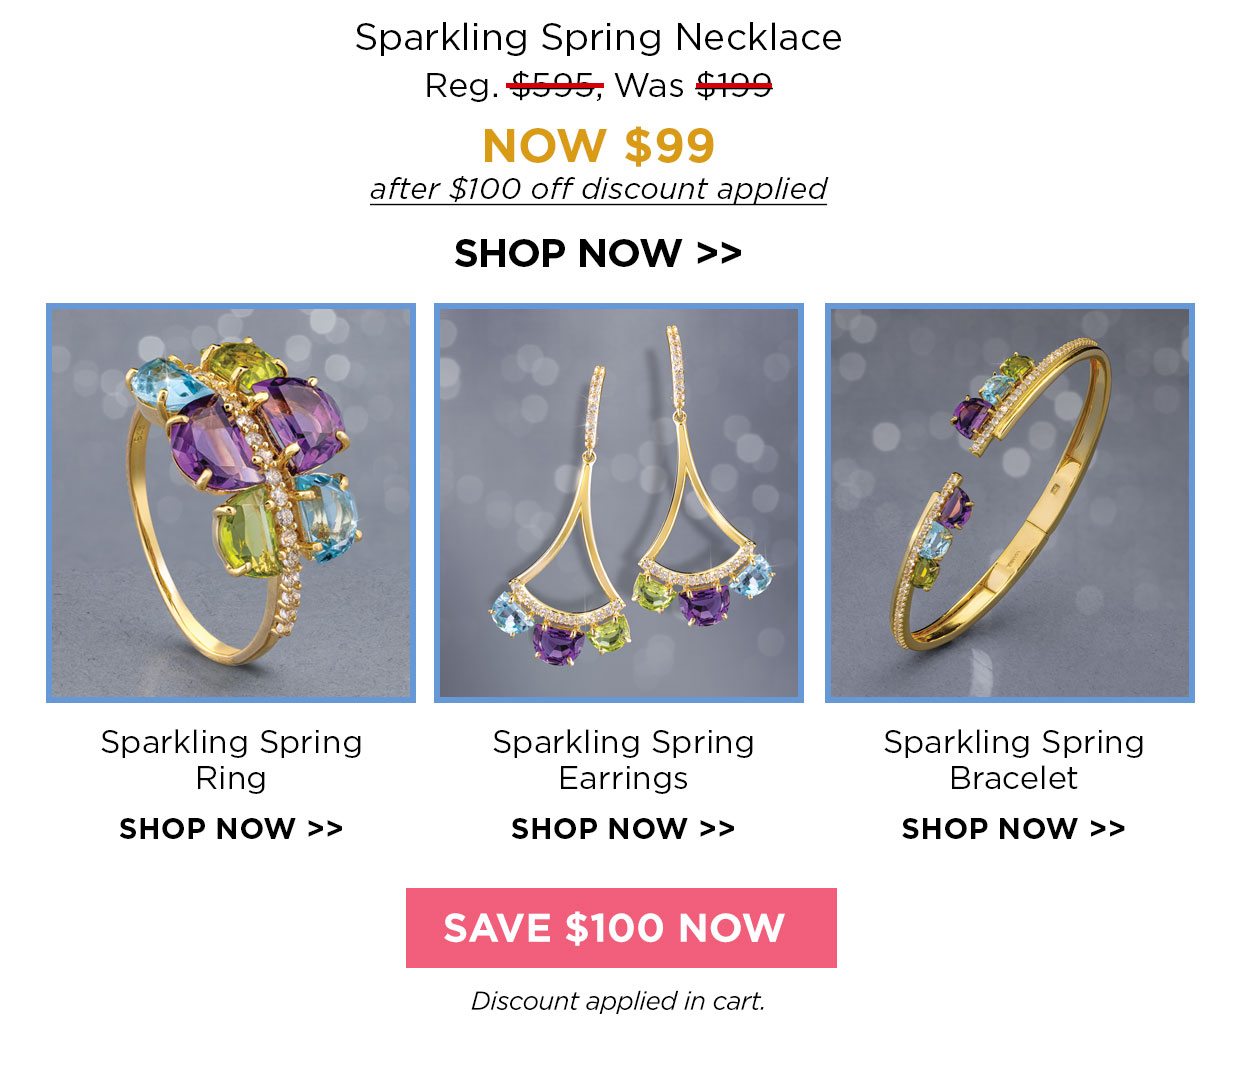 Sparkling Spring Necklace Reg. $595, Was $199, NOW $99 after $100 off discount applied. Sparkling Spring Ring. Sparkling Spring Earrings. Sparkling Spring Bracelet. Save $100 Now button. Discount applied in cart.